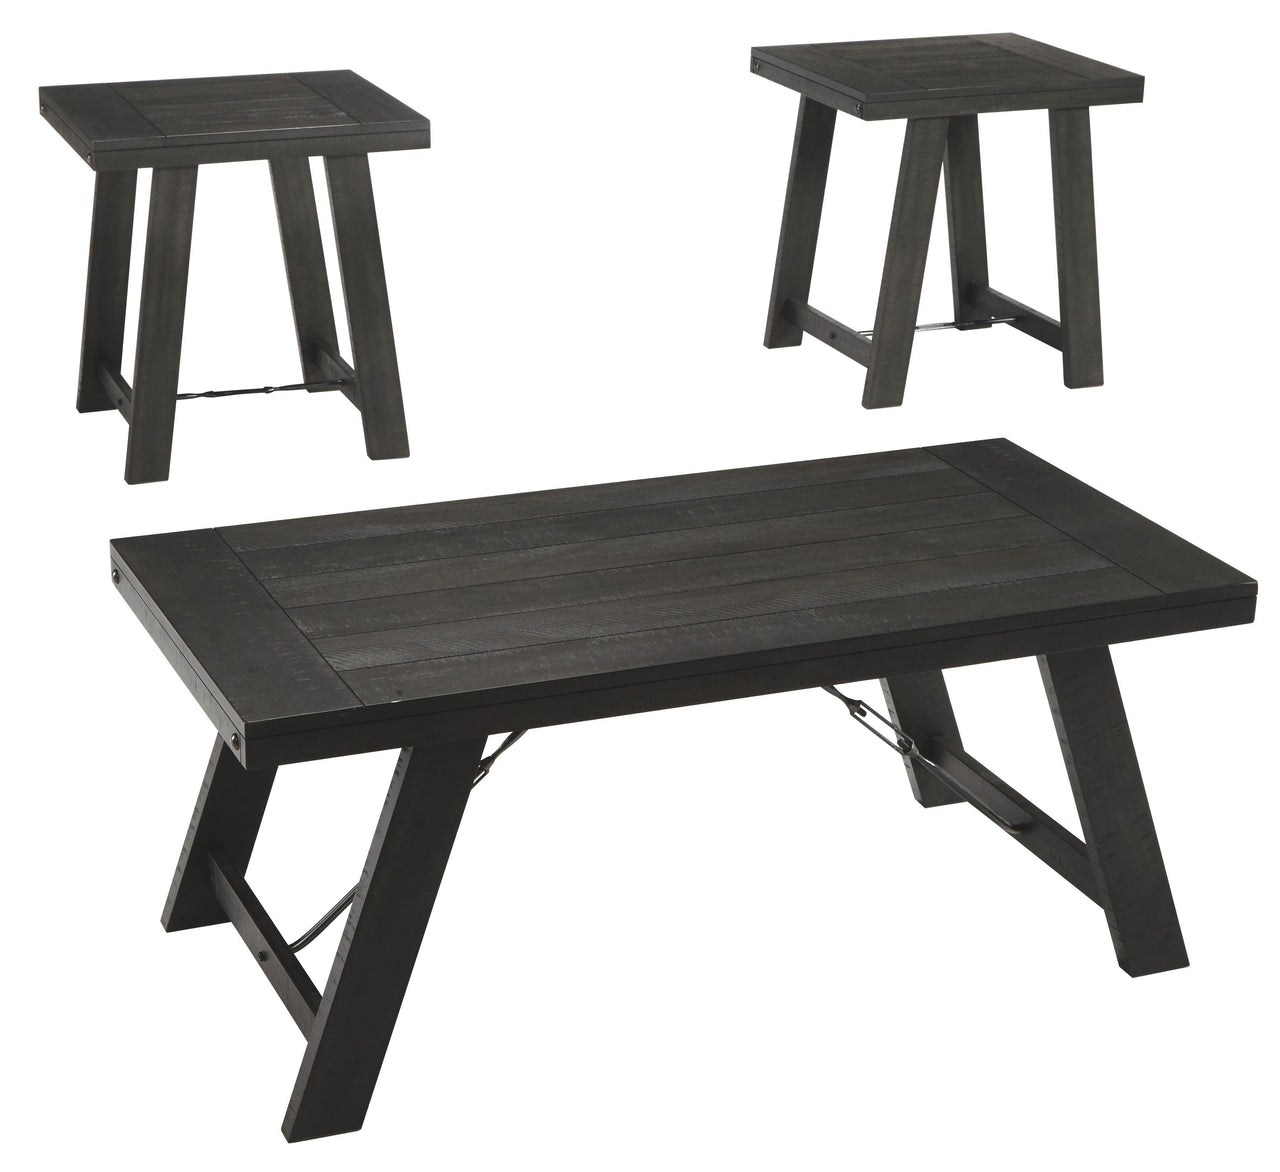 Noorbrook - Black / Pewter - Occasional Table Set (Set of 3) Tony's Home Furnishings Furniture. Beds. Dressers. Sofas.